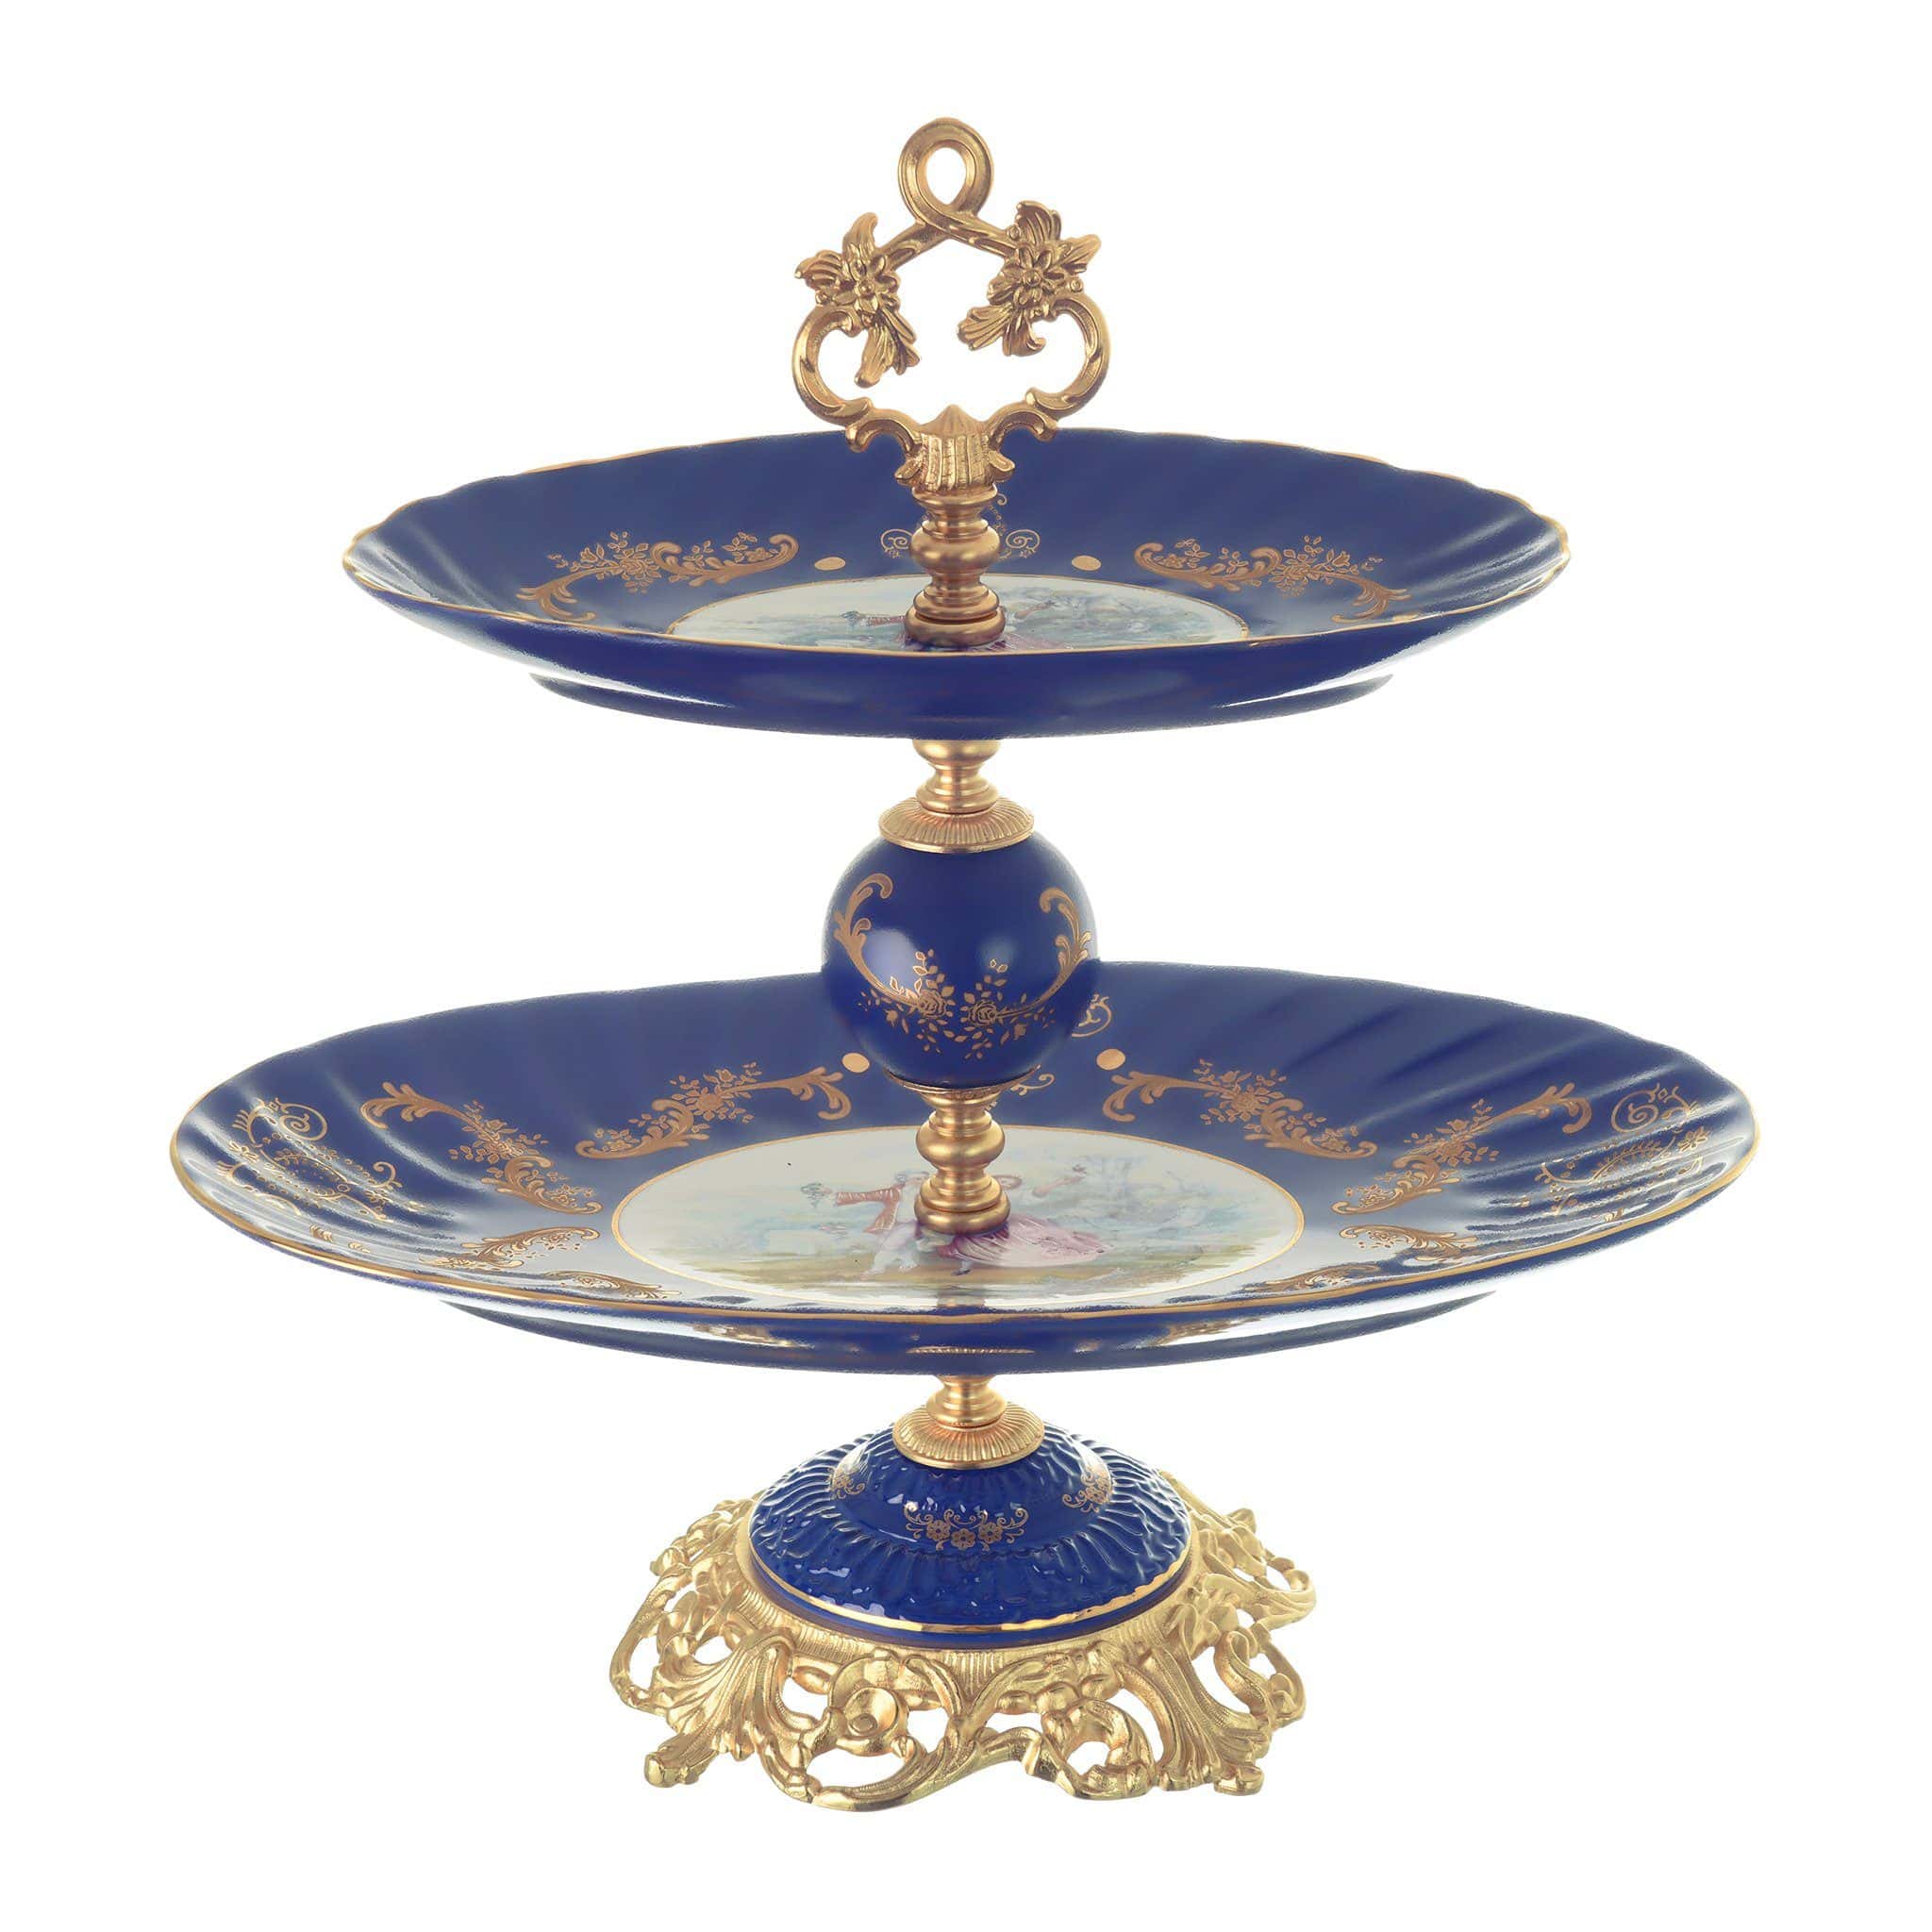 Caroline - Oval Stand 2 Tiers with Base - Romeo & Juliet - Blue & Gold - 43cm - 58000581